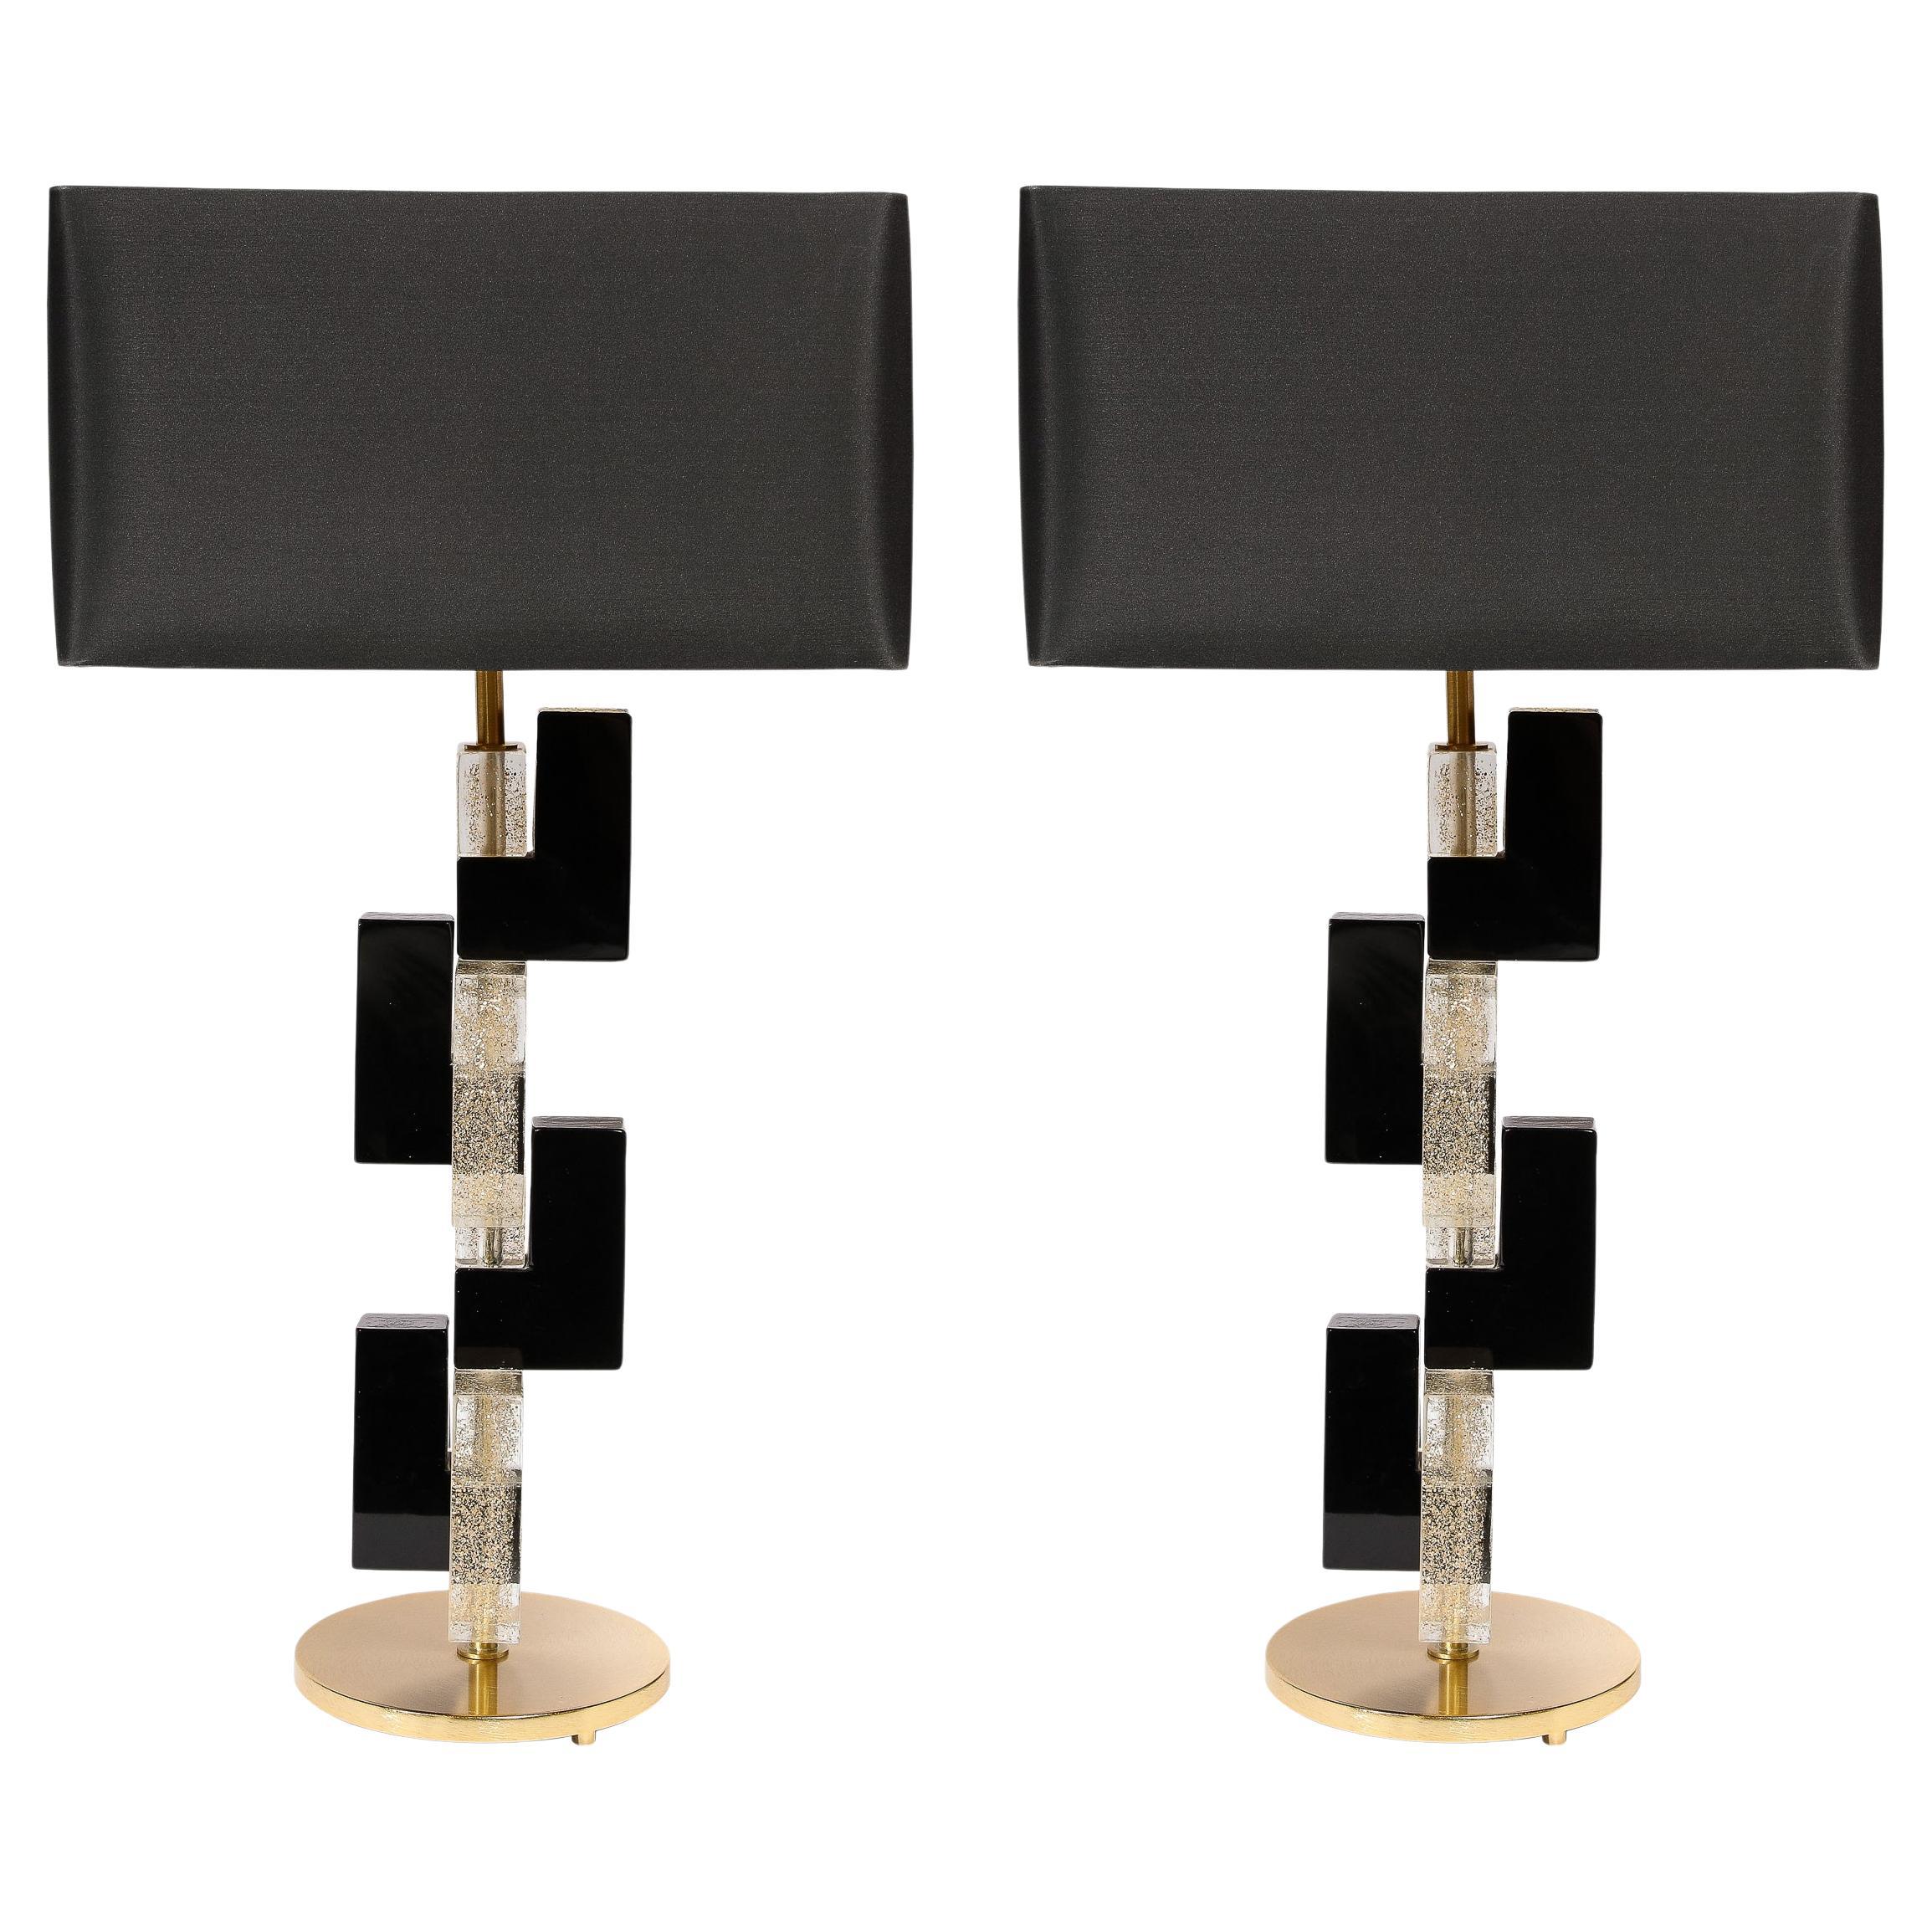 Modernist Hand-Blown Murano Rectilinear Table Lamps in Black & Translucent Glass